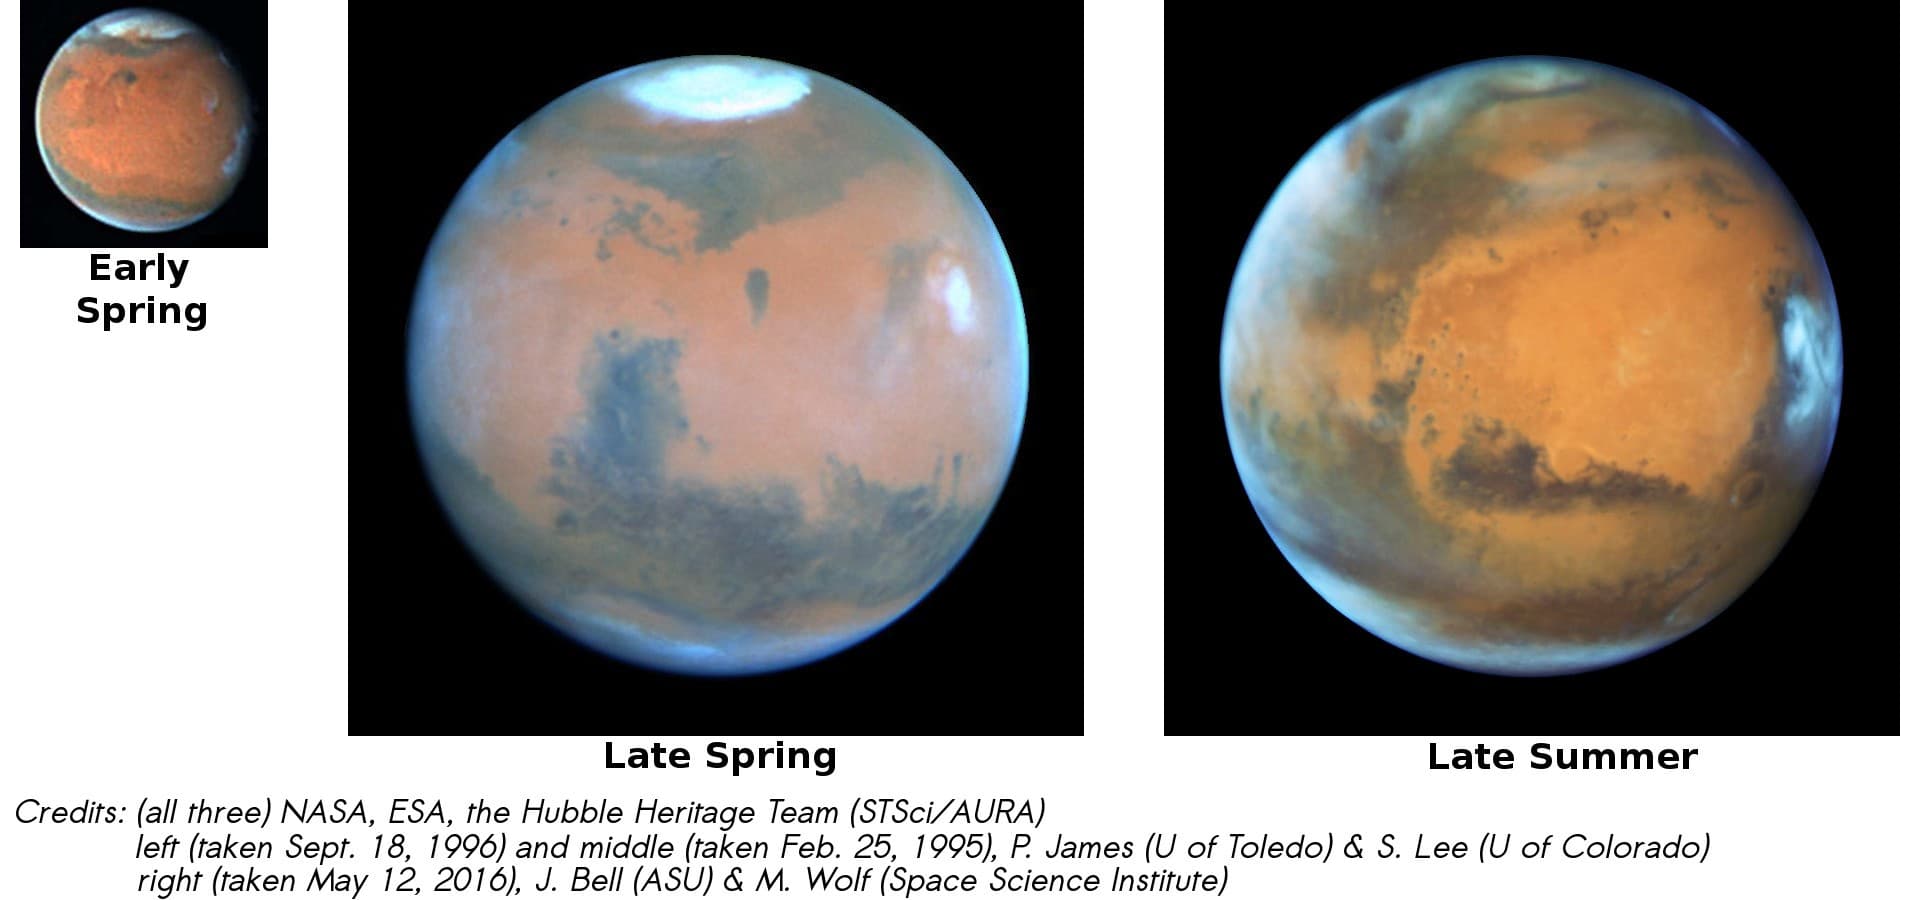 Early
Spring
Late Spring
Late Summer
Credits: (all three) NASA, ESA, the Hubble Heritage Team (STSci/AURA)
left (taken Sept. 18, 1996) and middle (taken Feb. 25, 1995), P. James (U of Toledo) & S. Lee (U of Colorado)
right (taken May 12, 2016), J. Bell (ASU) & M. Wolf (Space Science Institute)
